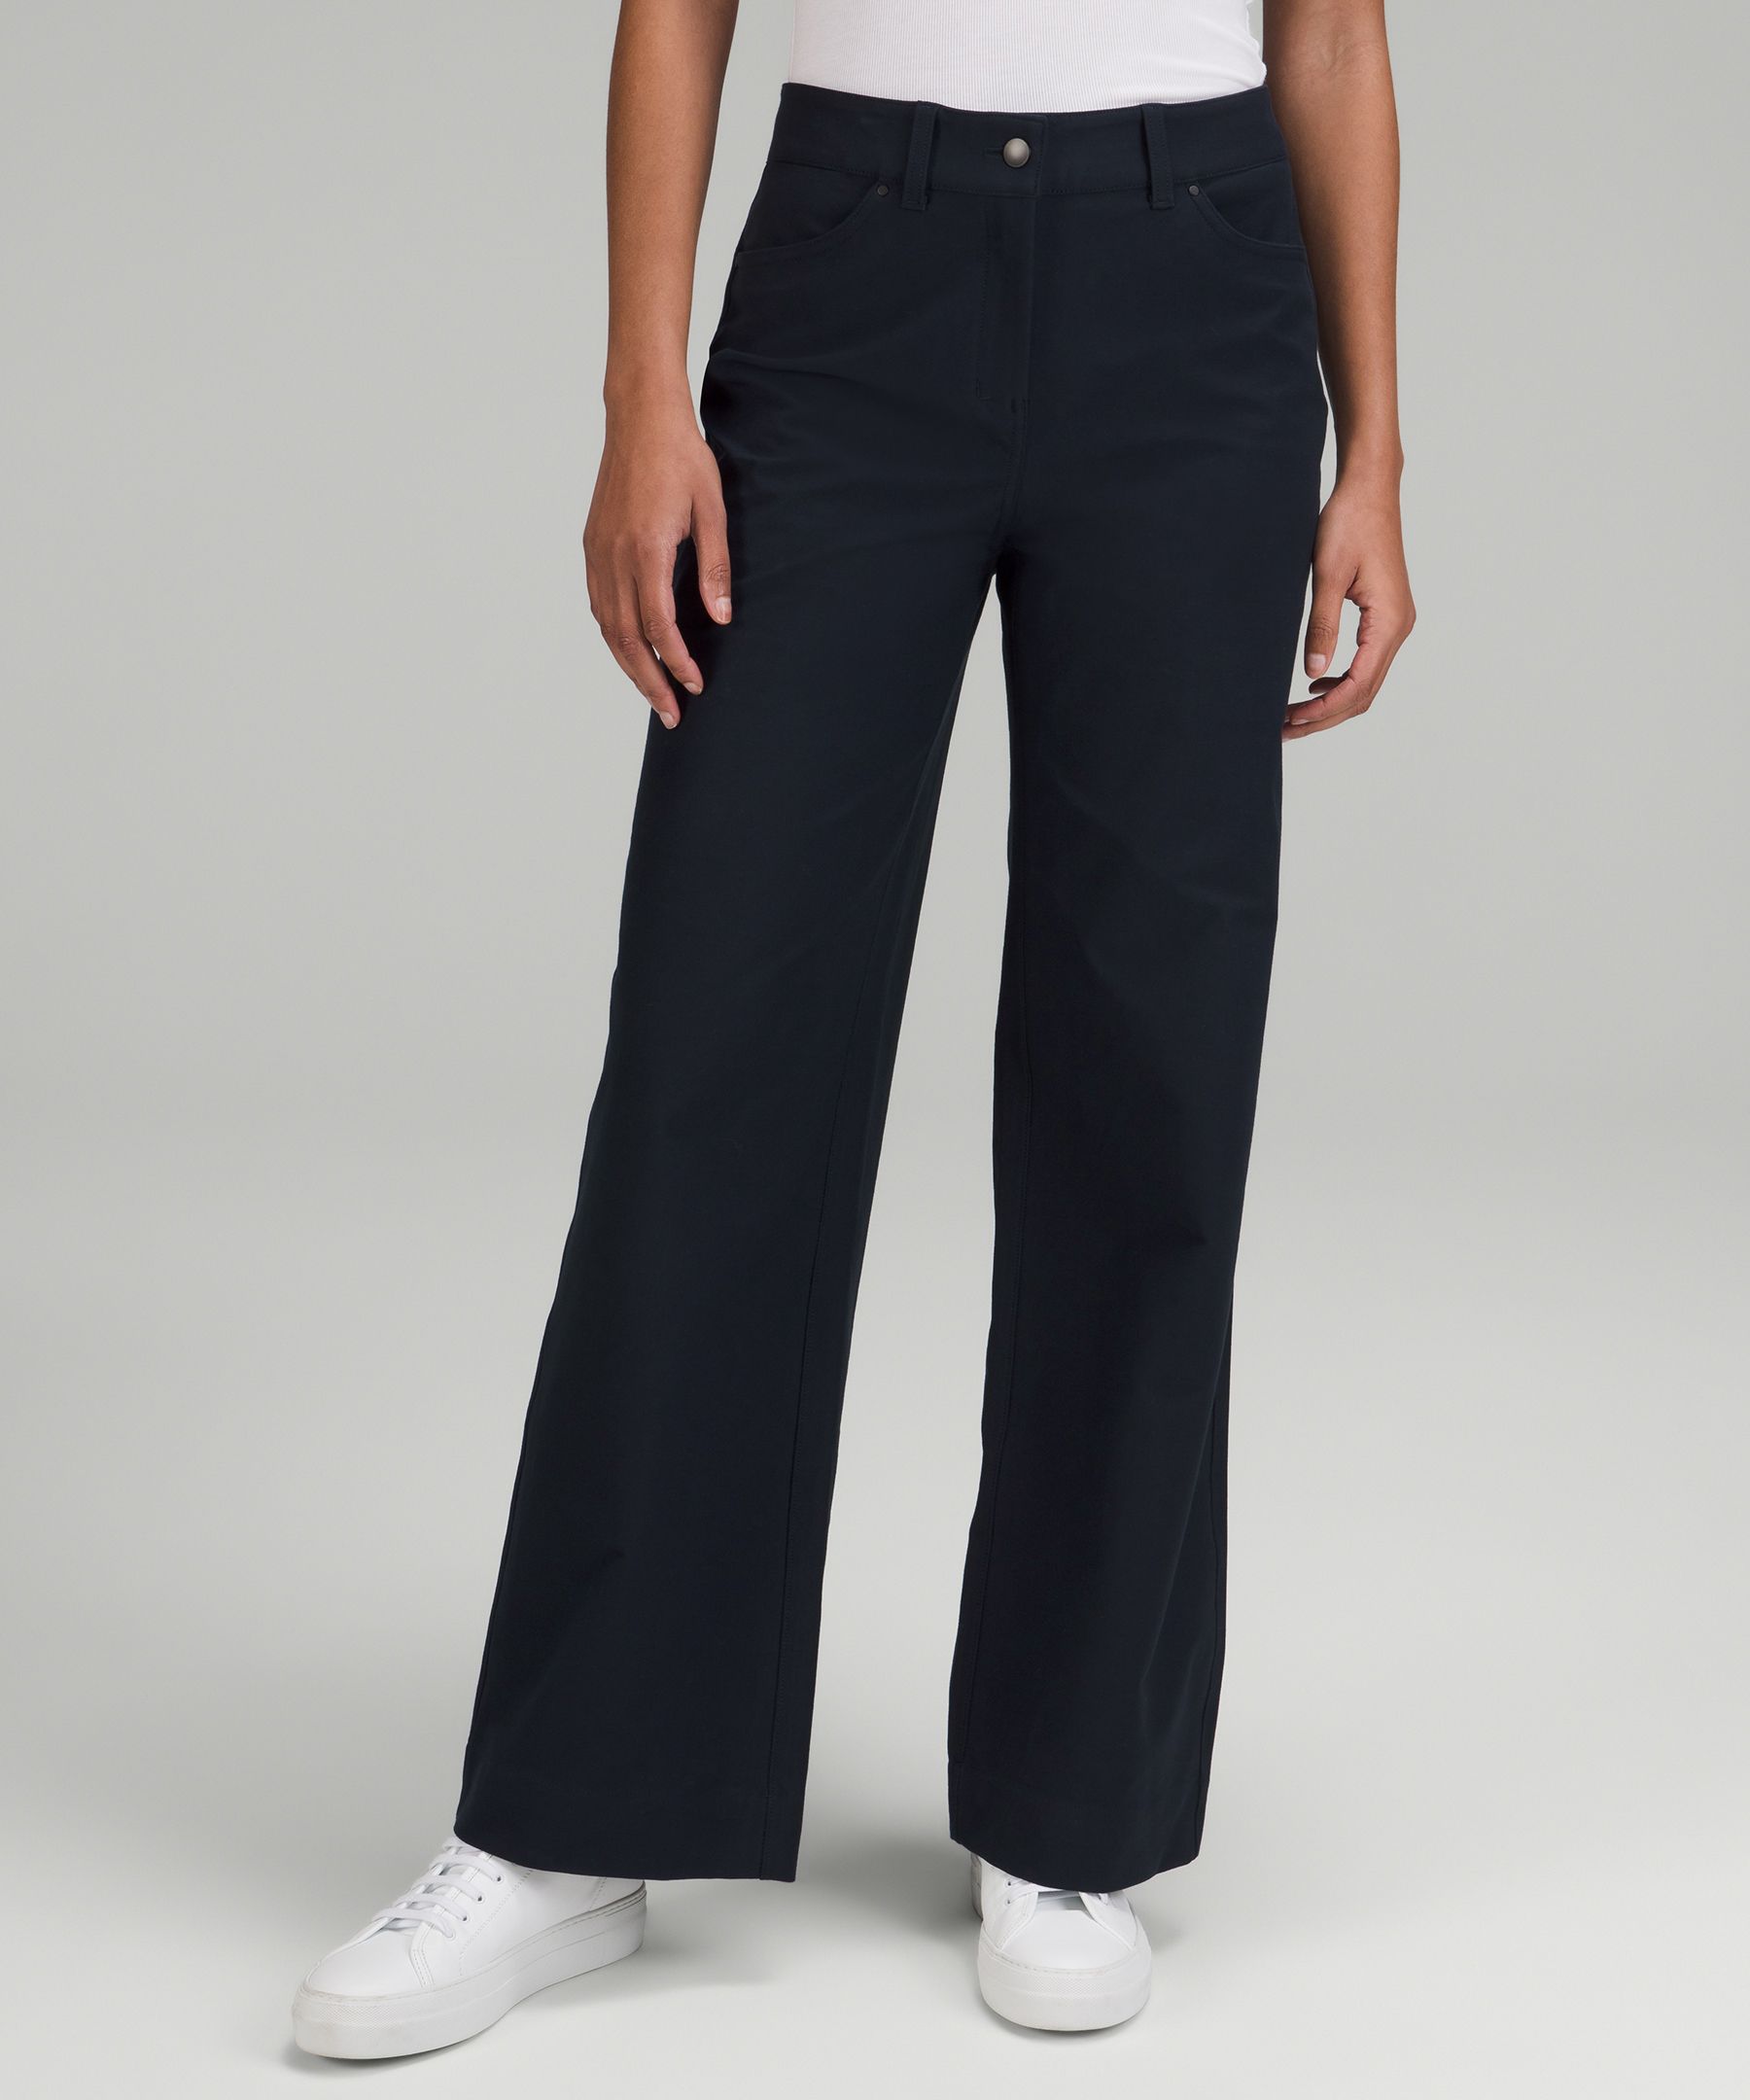 yall already know i live for these align wide length pants #lululemon, what is a lululemon educator